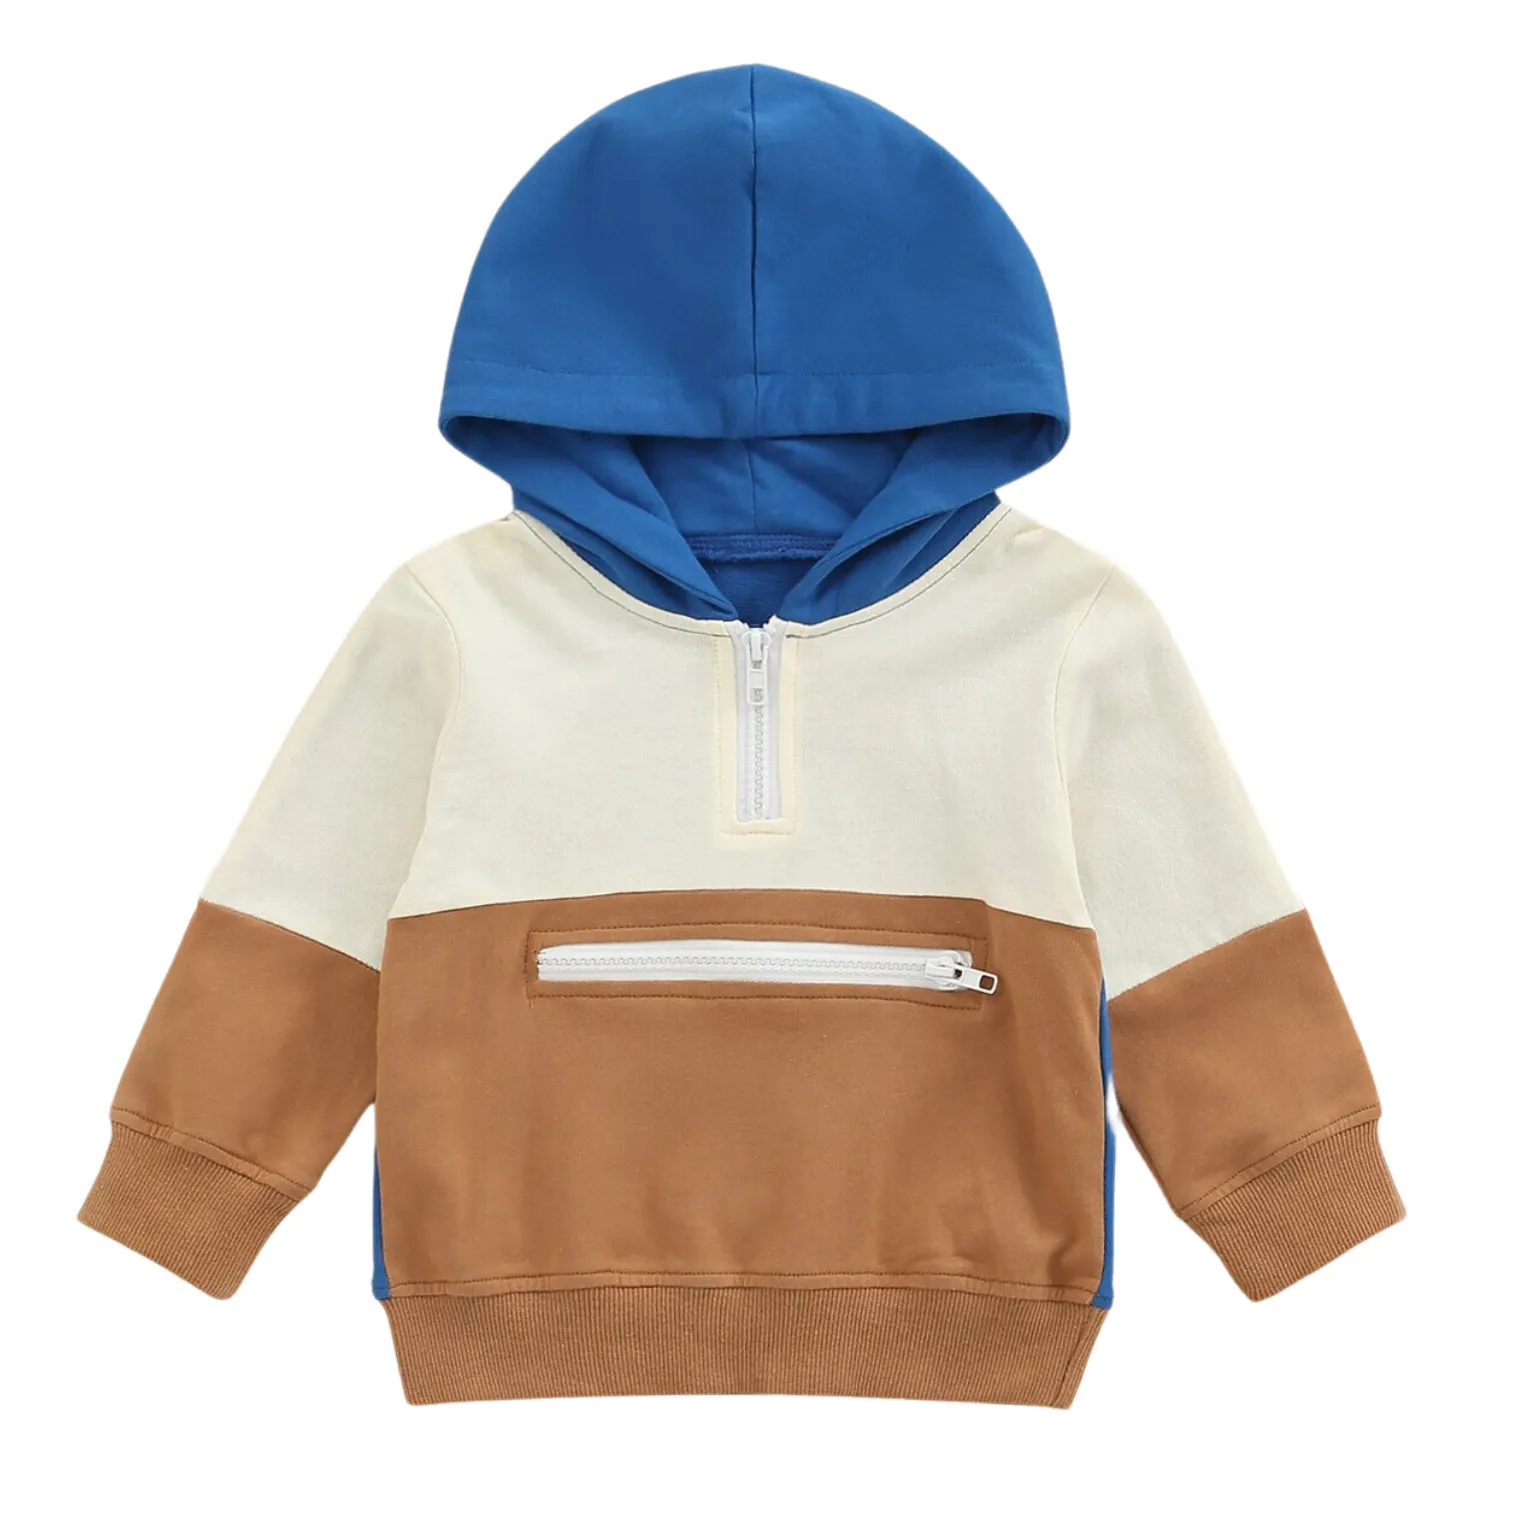 Manufacturing Toddler Hoodies according to your needs